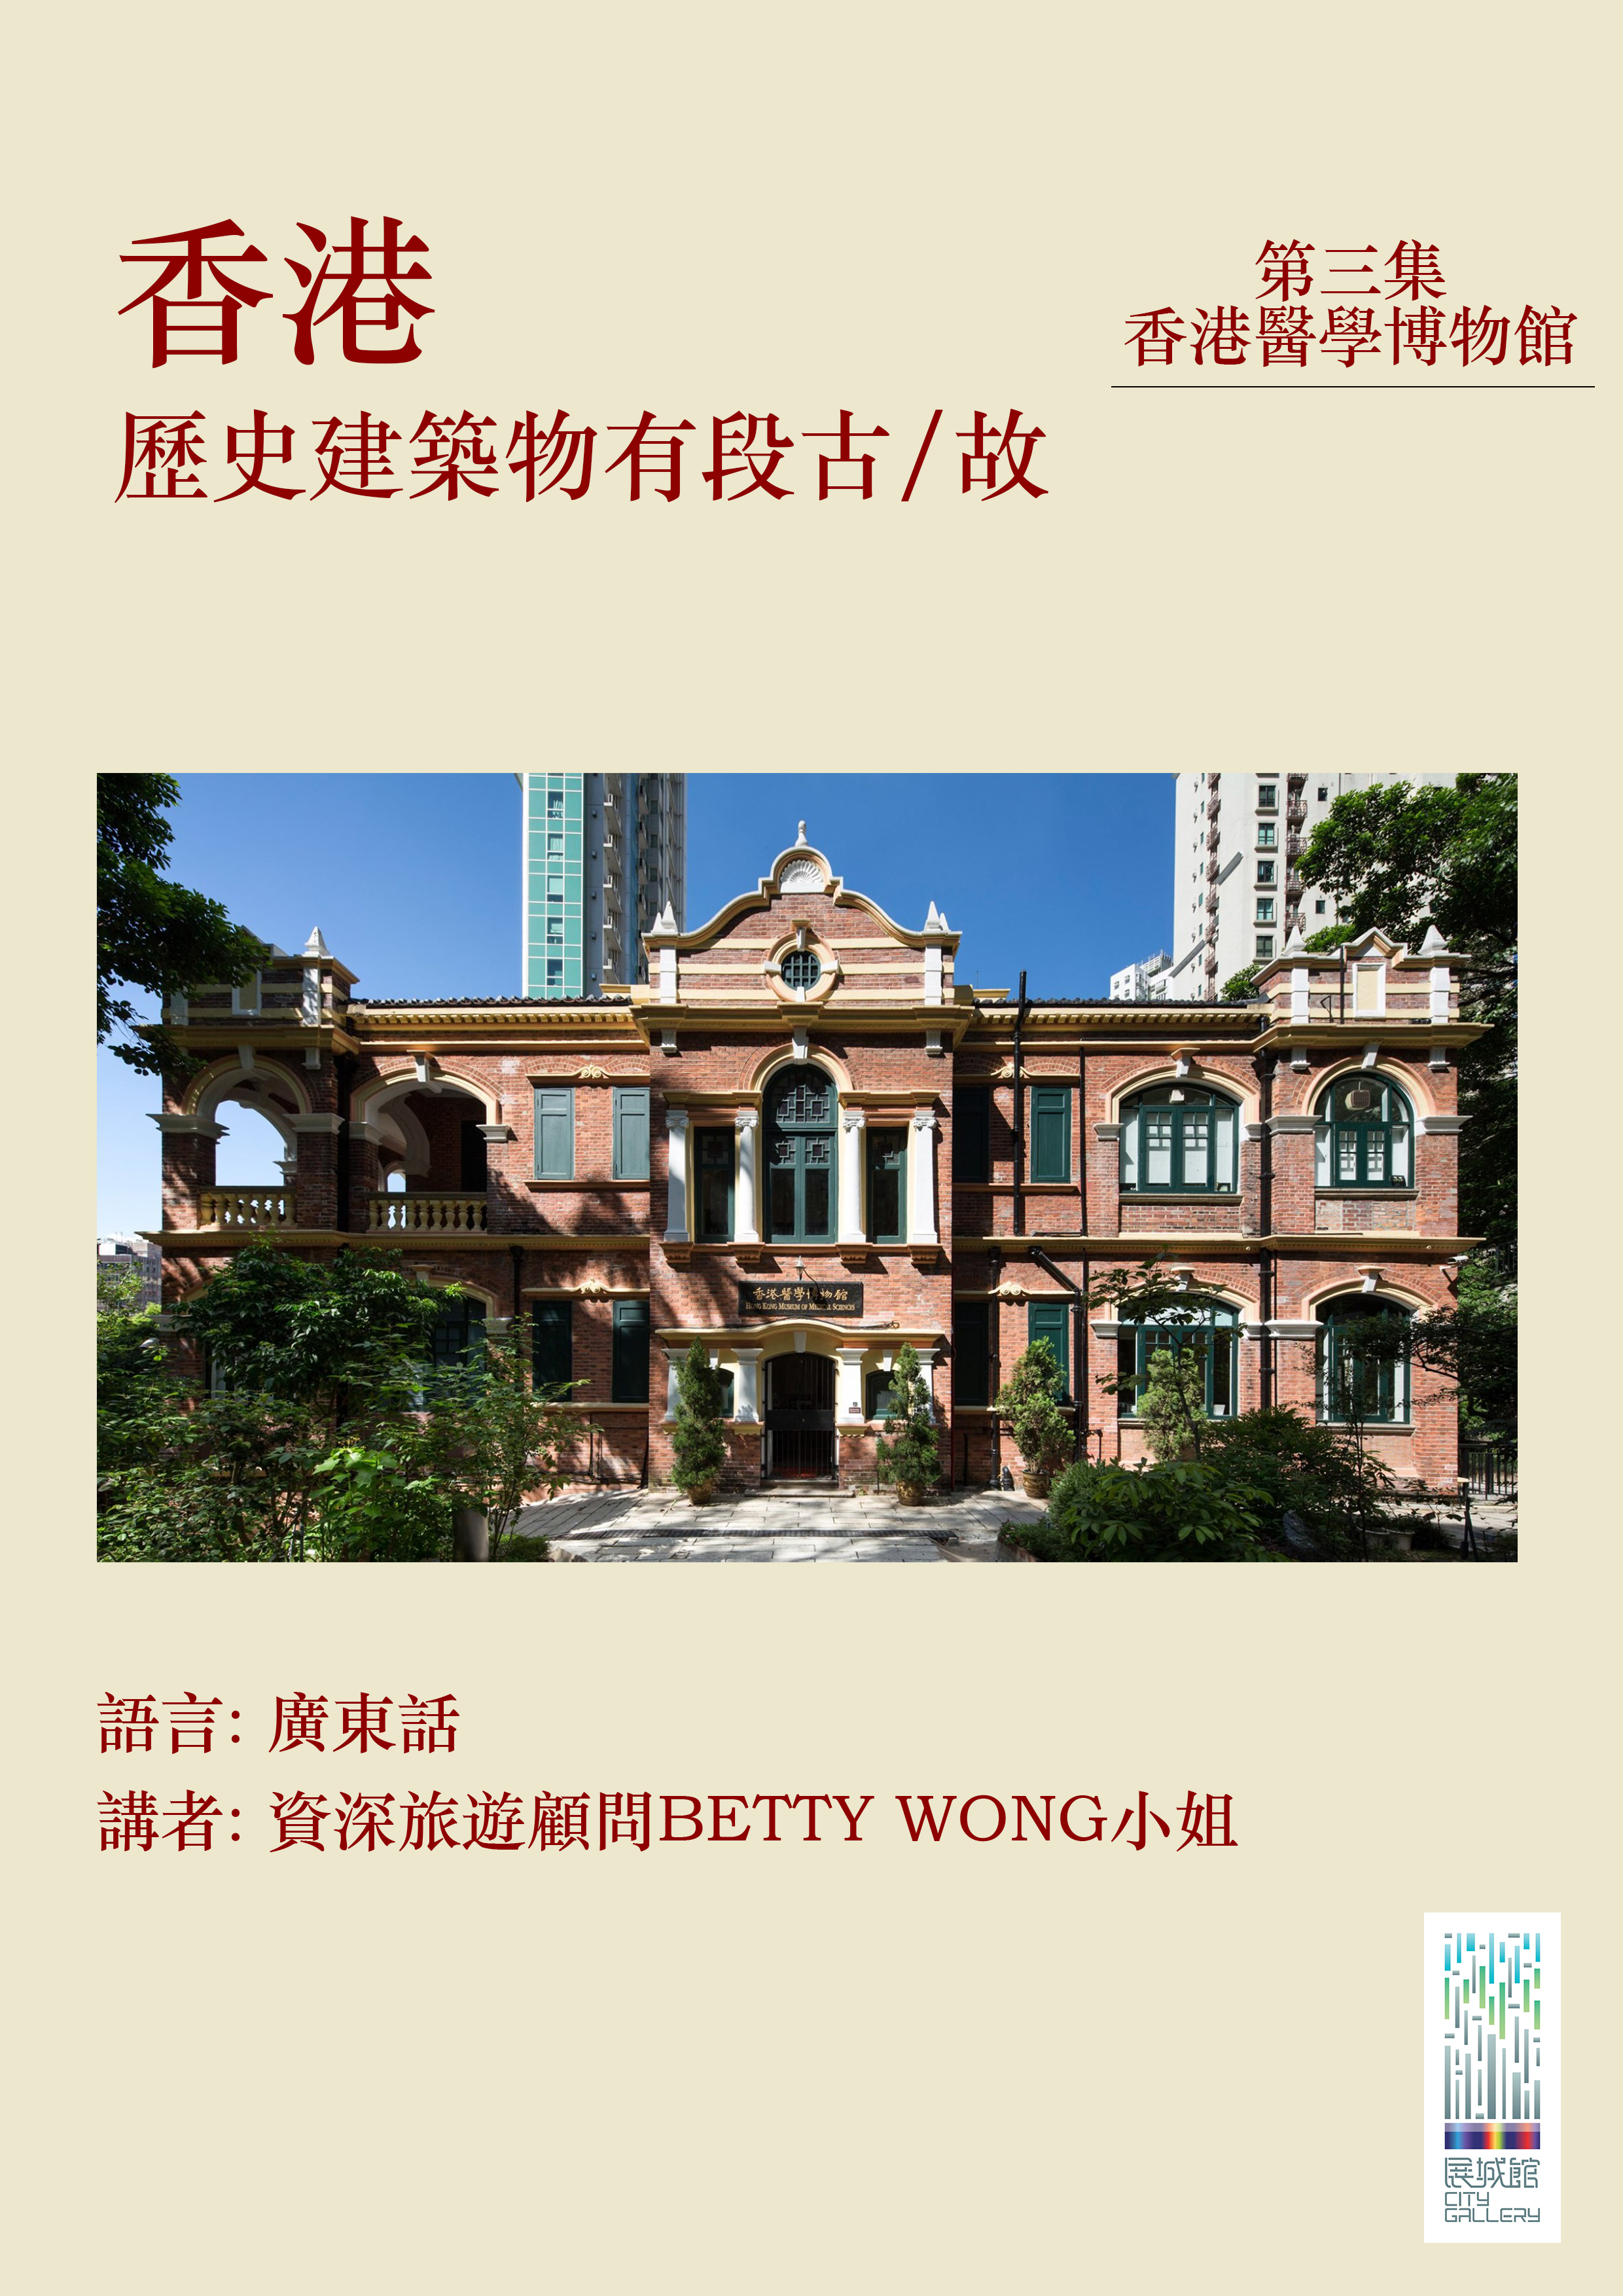 The story of Historic Buildings in Hong Kong Museum of Medical Sciences